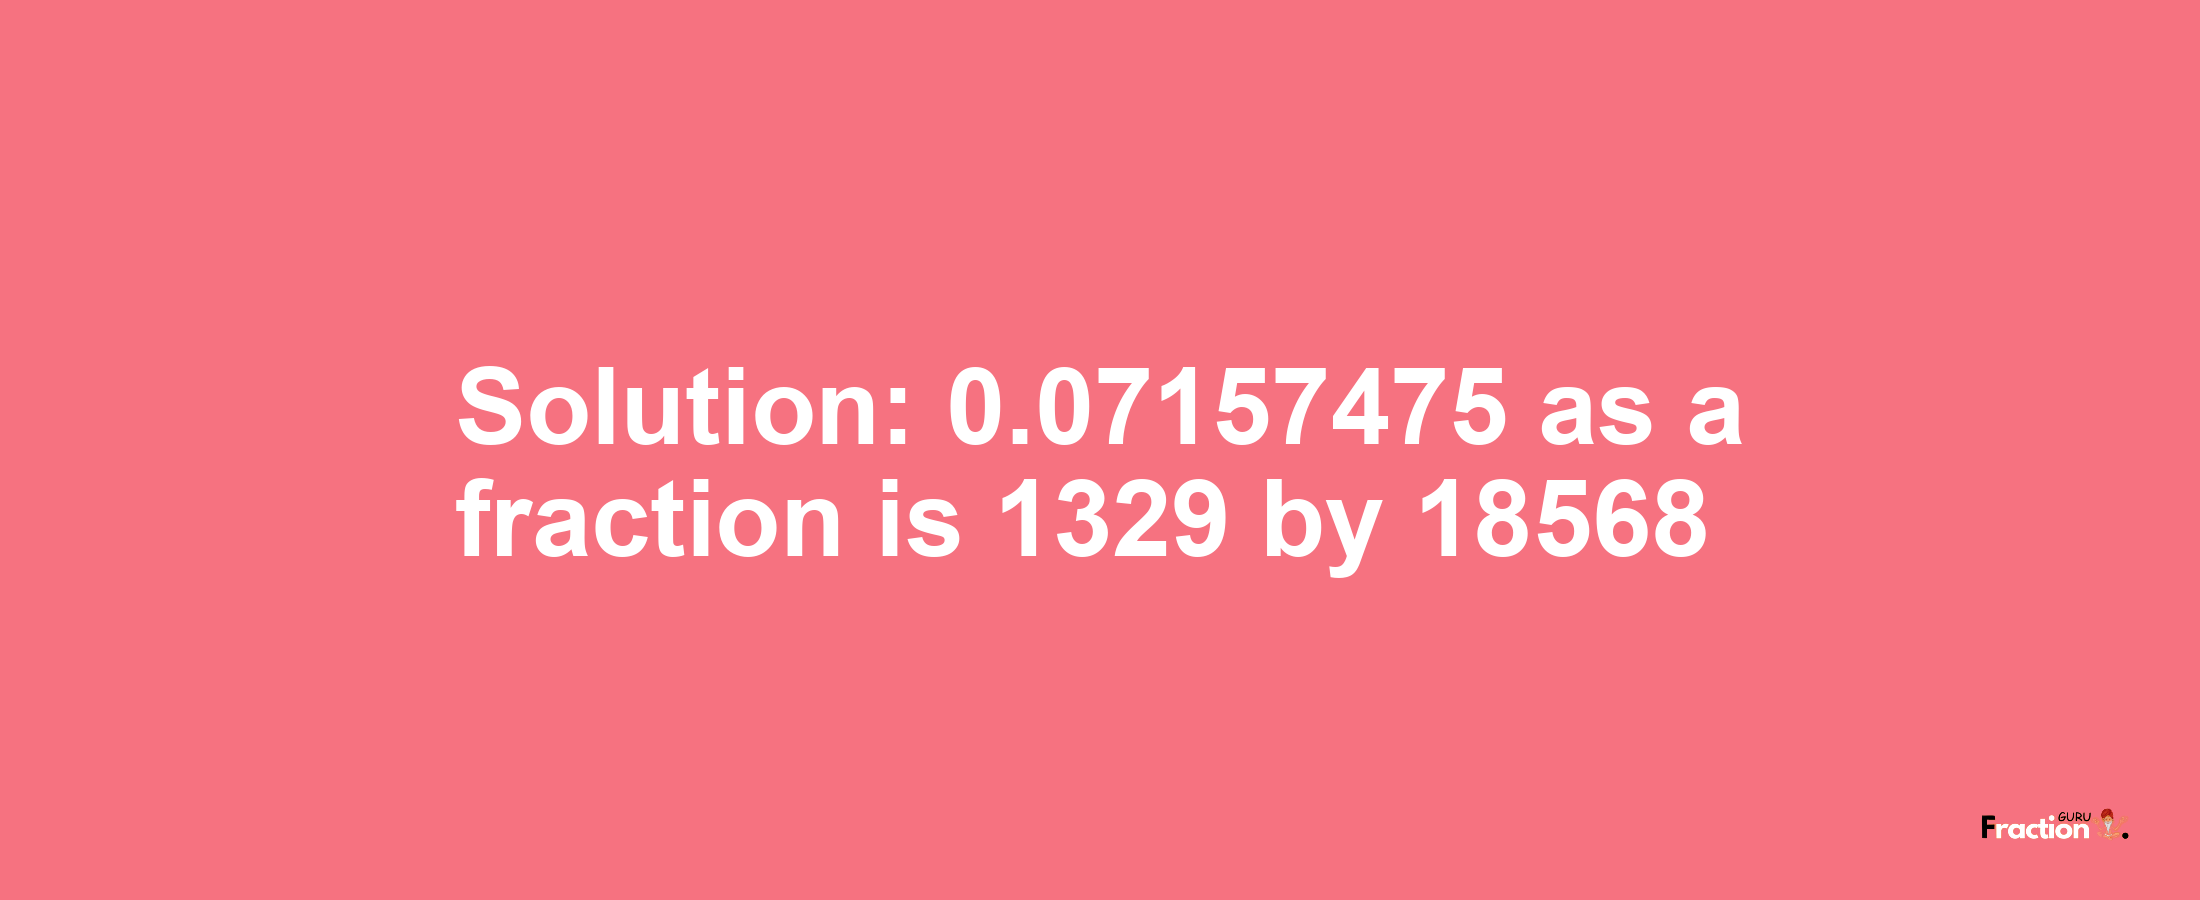 Solution:0.07157475 as a fraction is 1329/18568